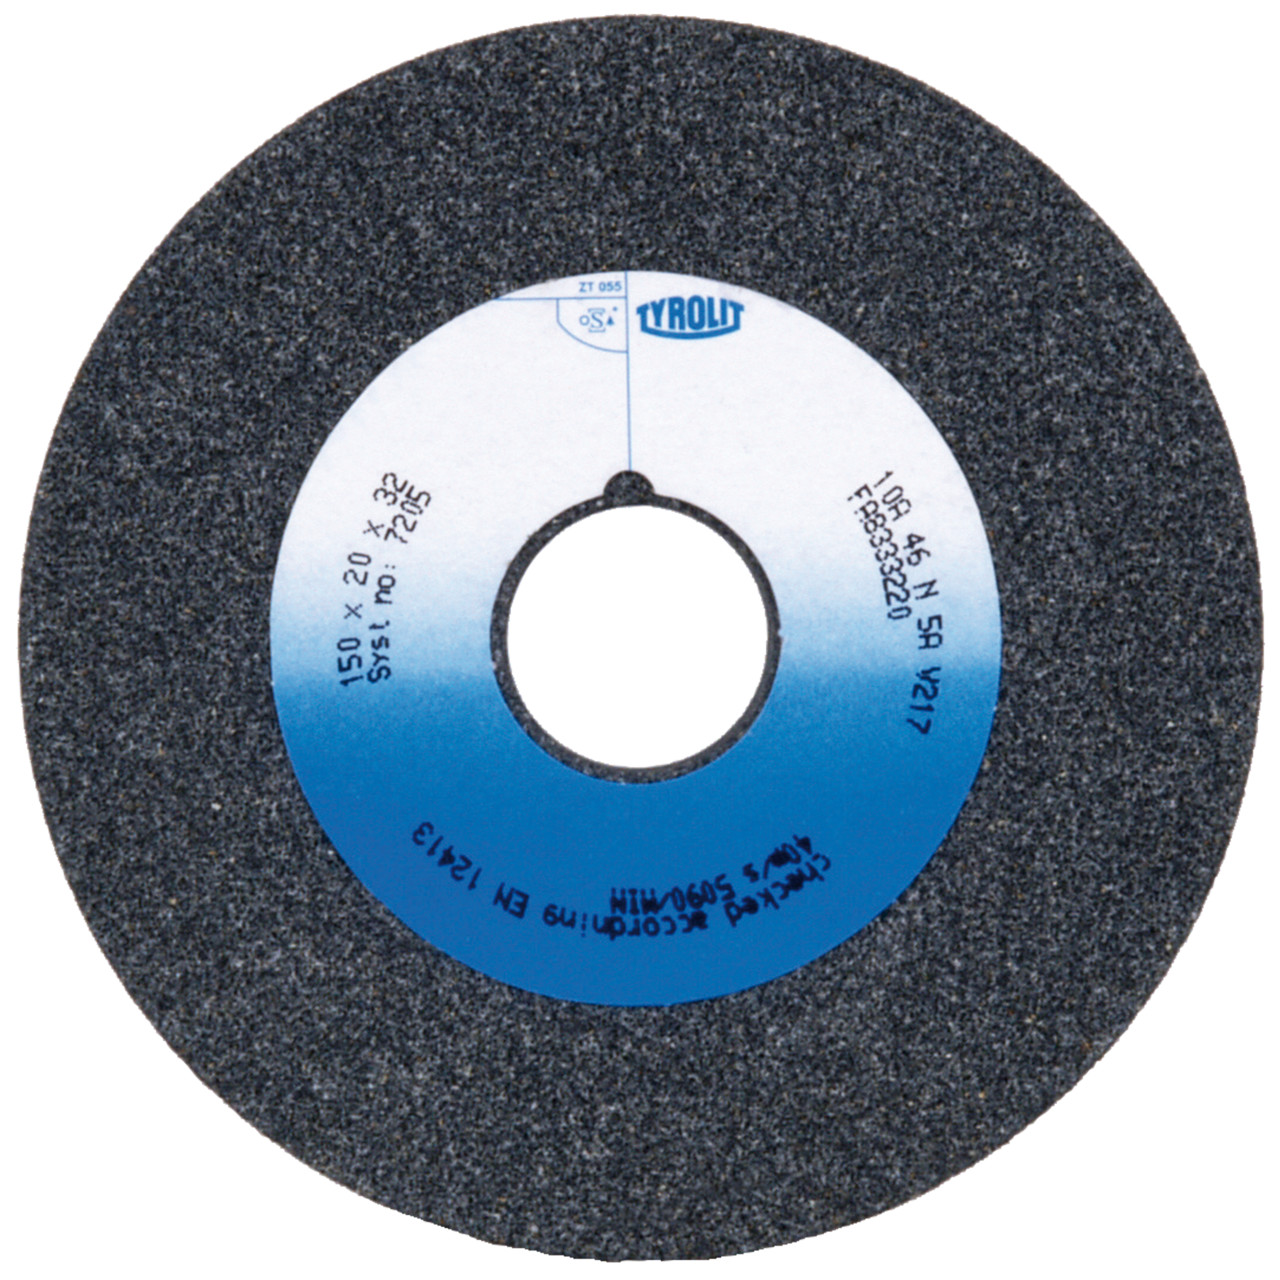 Tyrolit Conventional ceramic grinding discs DxDxH 200x32x51 For unalloyed and low-alloy steels, shape: 1, Art. 516594